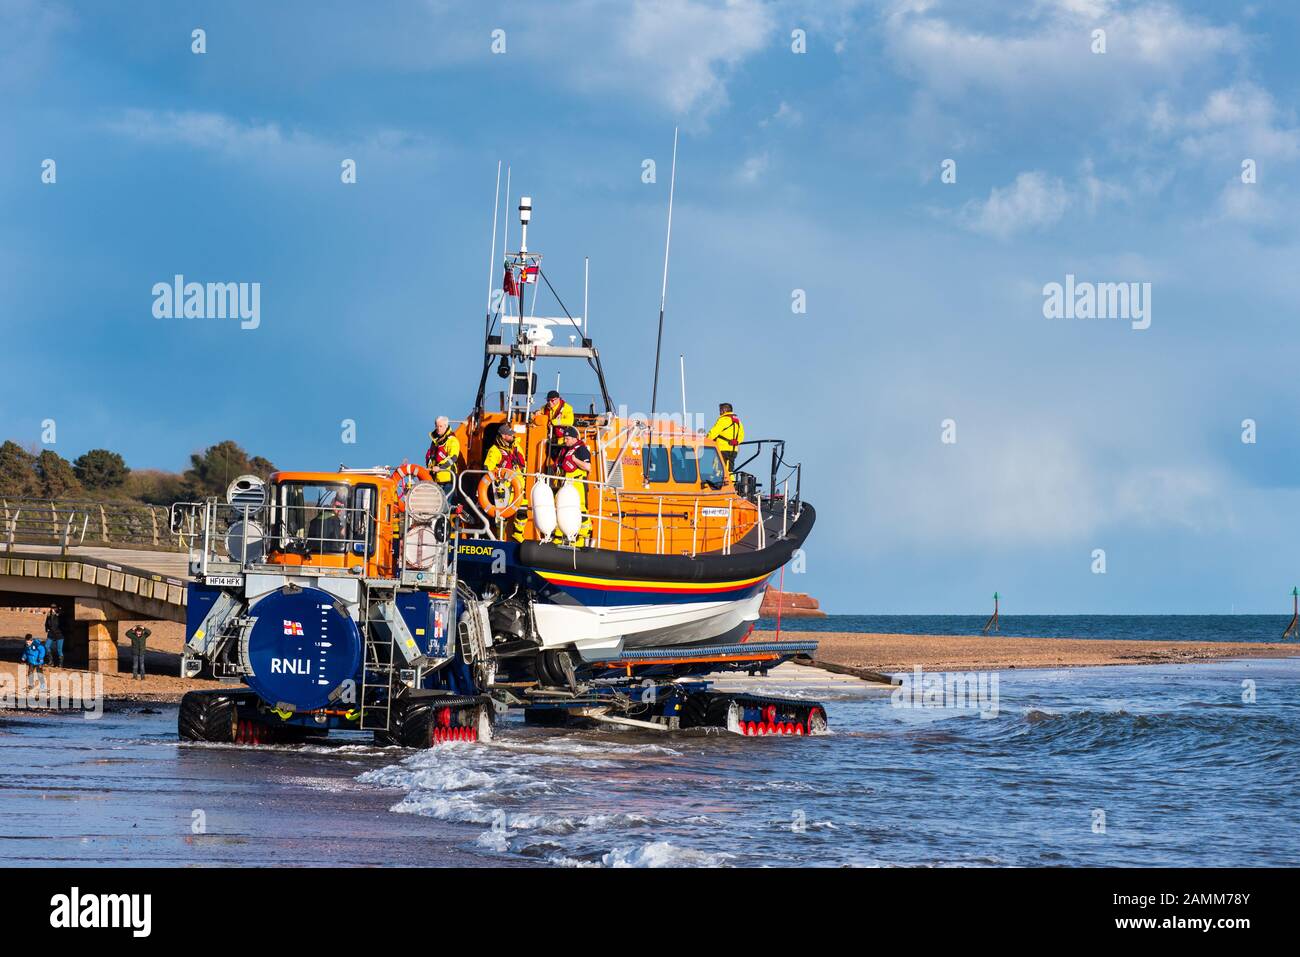 EXMOUTH, DEVON, UK - 3APR2019: RNLB R & J Welburn, a Shannon Class lifeboat, towed by tractor along the beach to a launch position during a regular ex Stock Photo